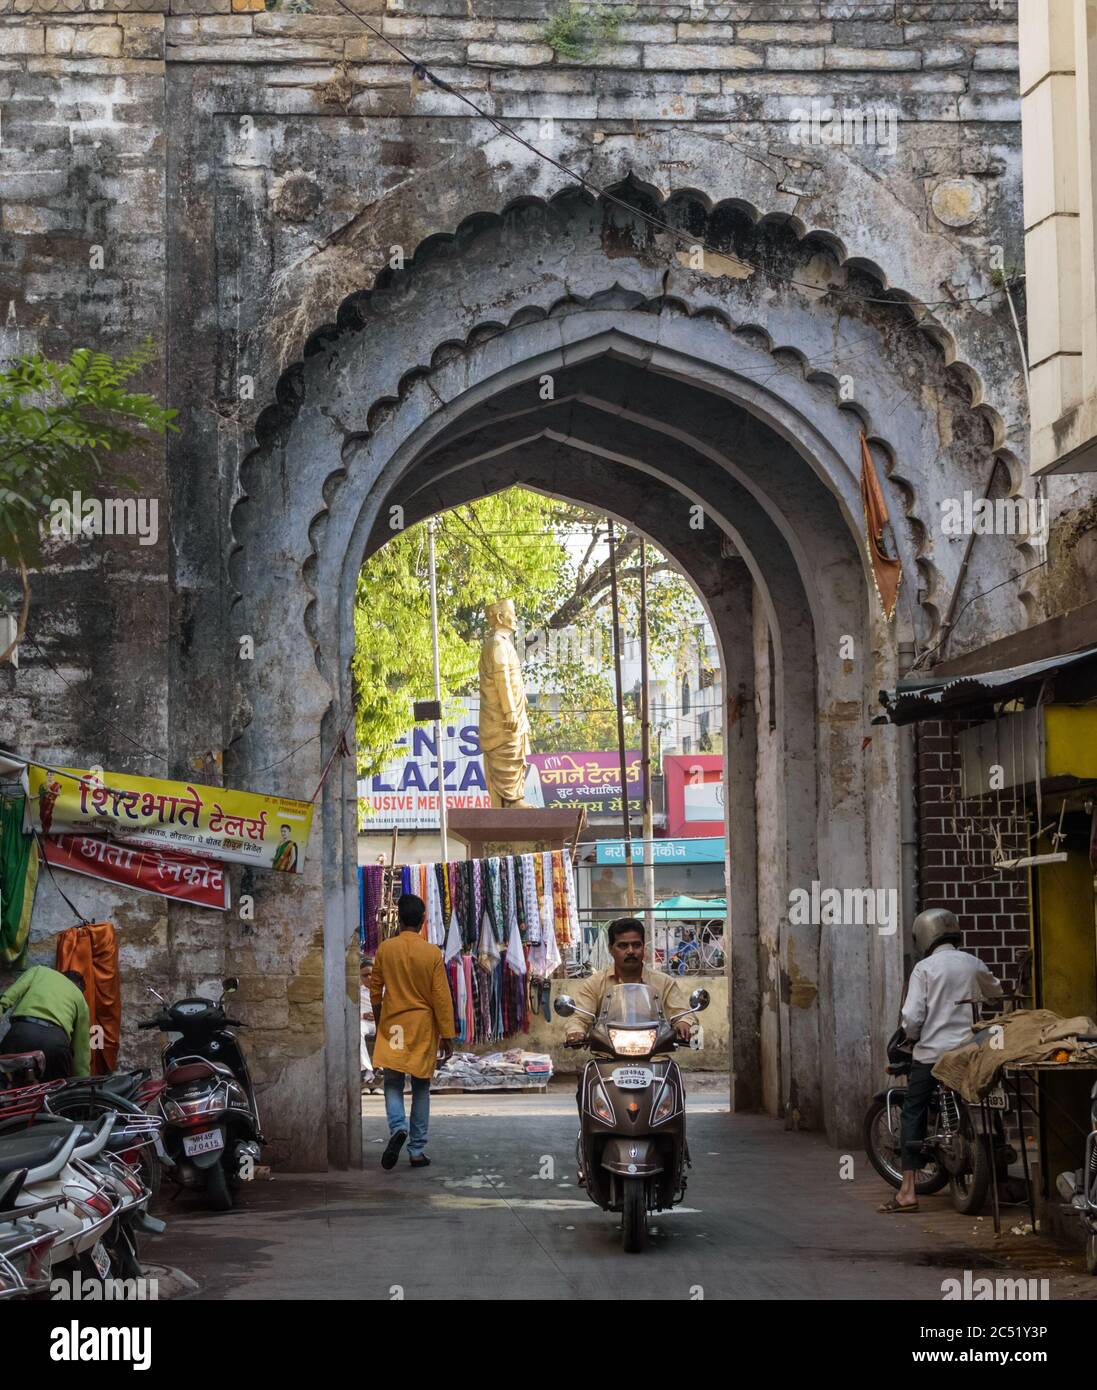 Nagpur, Maharashtra/India - March 8 2019: A man on a scooter rides through the arches  of an old gateway on the Pataleshwar Road in the Mahal area of Stock Photo